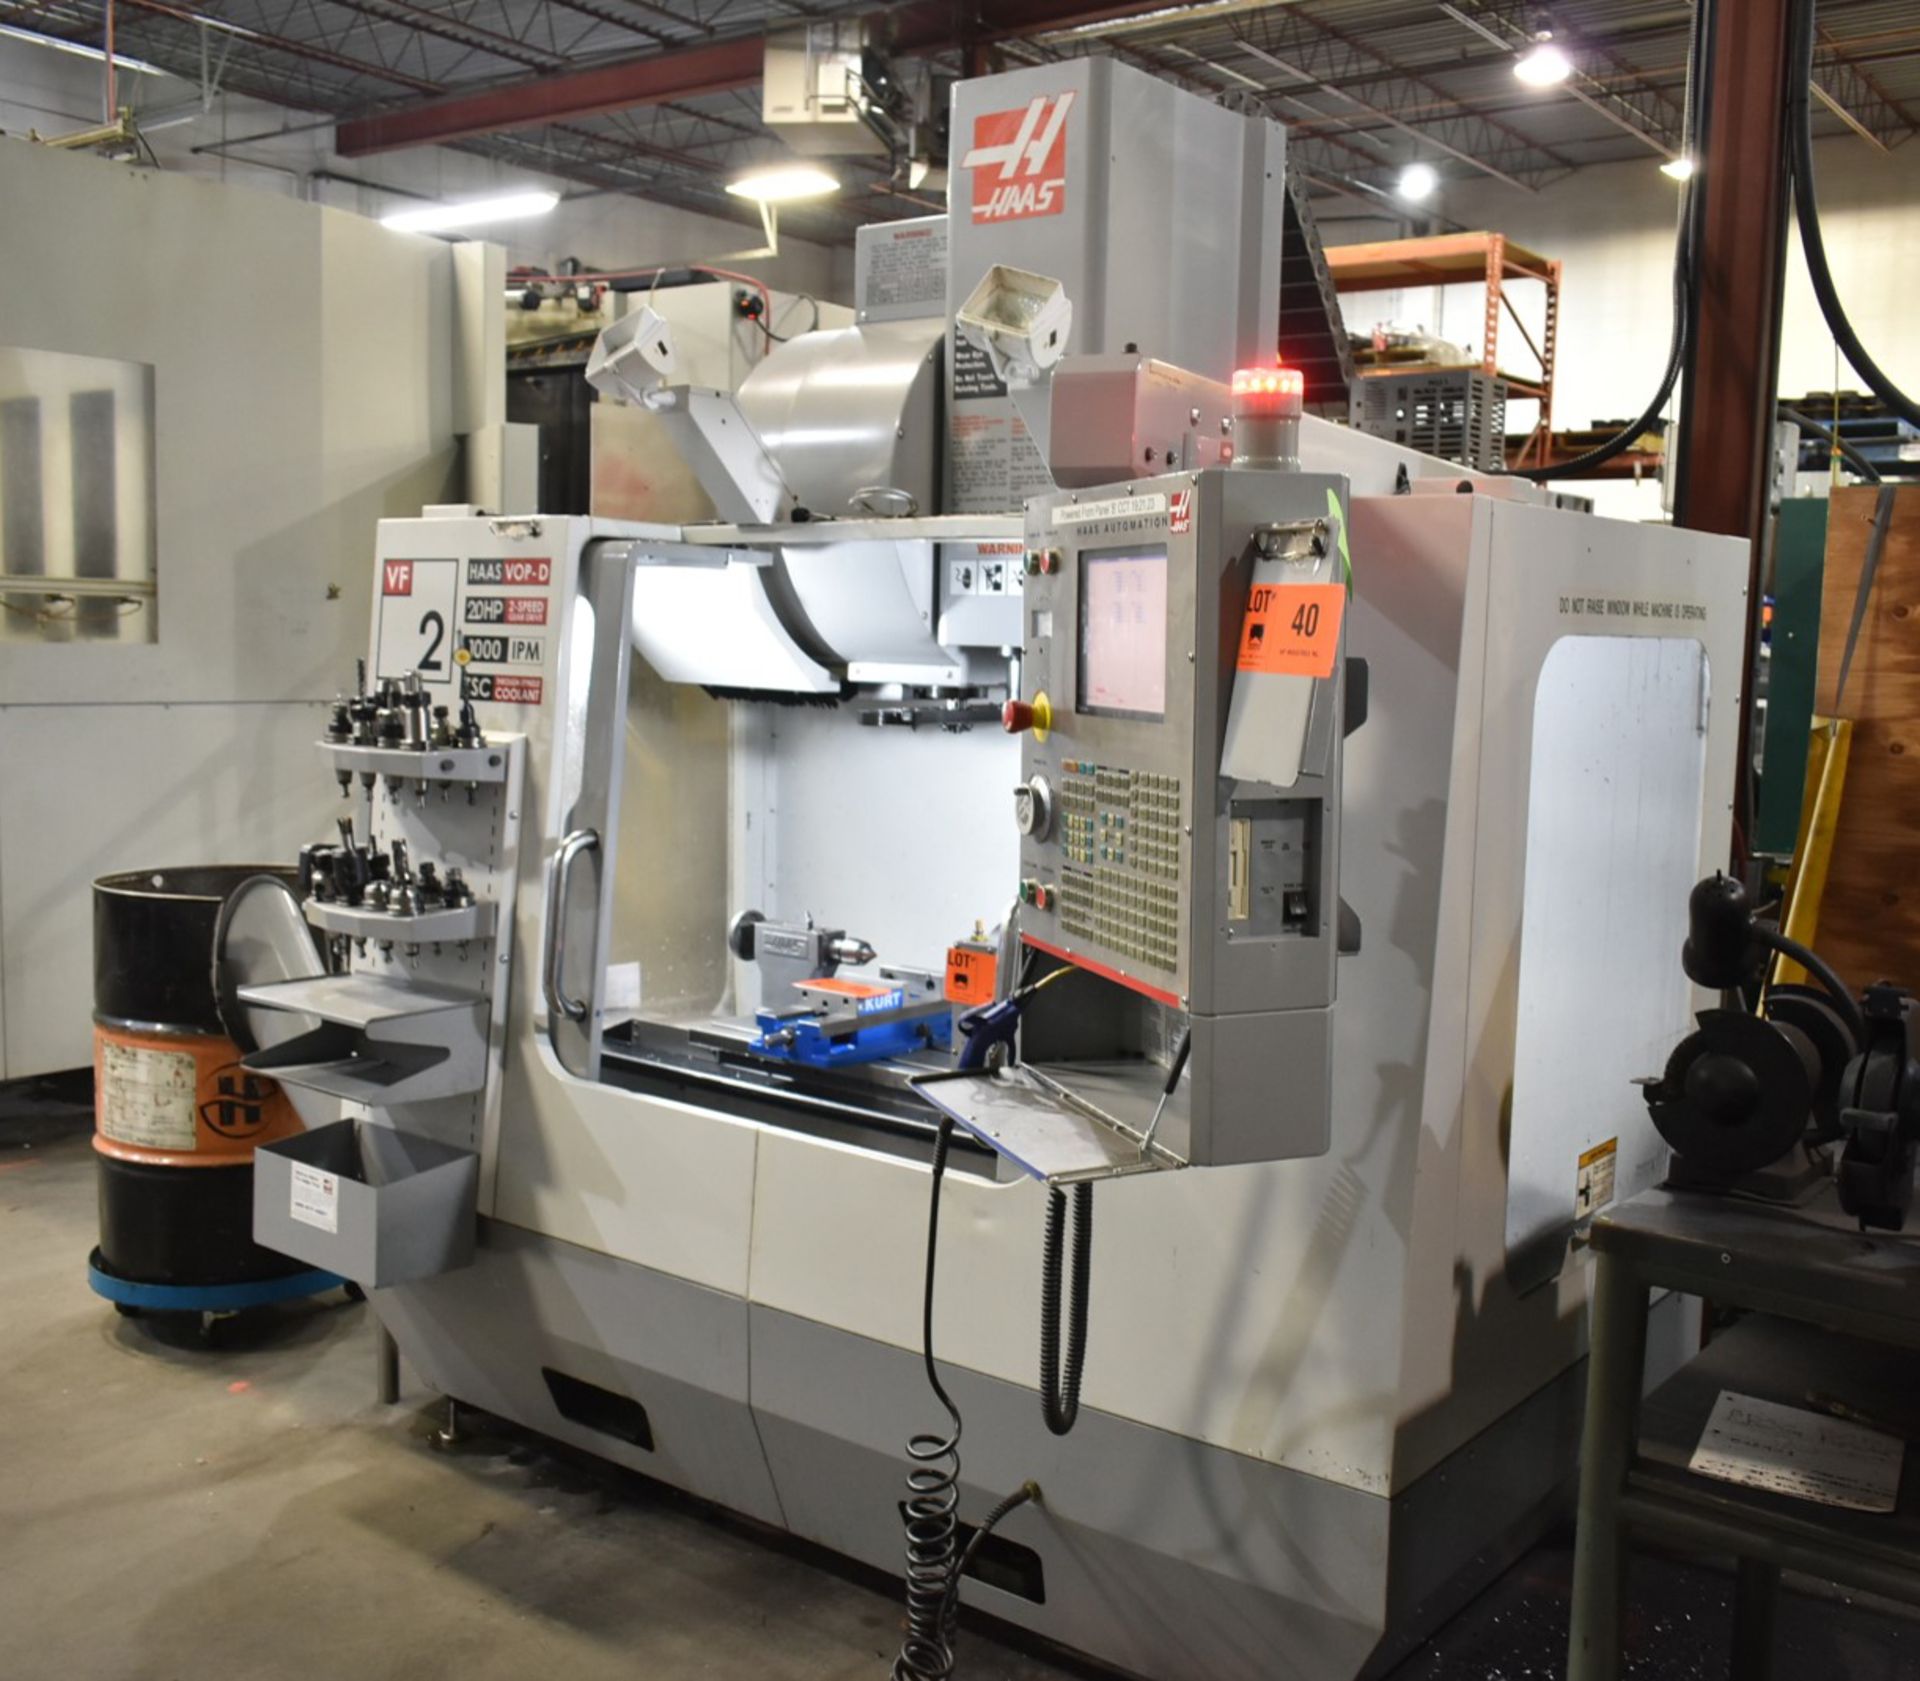 HAAS (2006) VF2B CNC VERTICAL MACHINING CENTER WITH HAAS CNC CONTROL, 36" X 14" T-SLOT TABLE, - Image 3 of 7